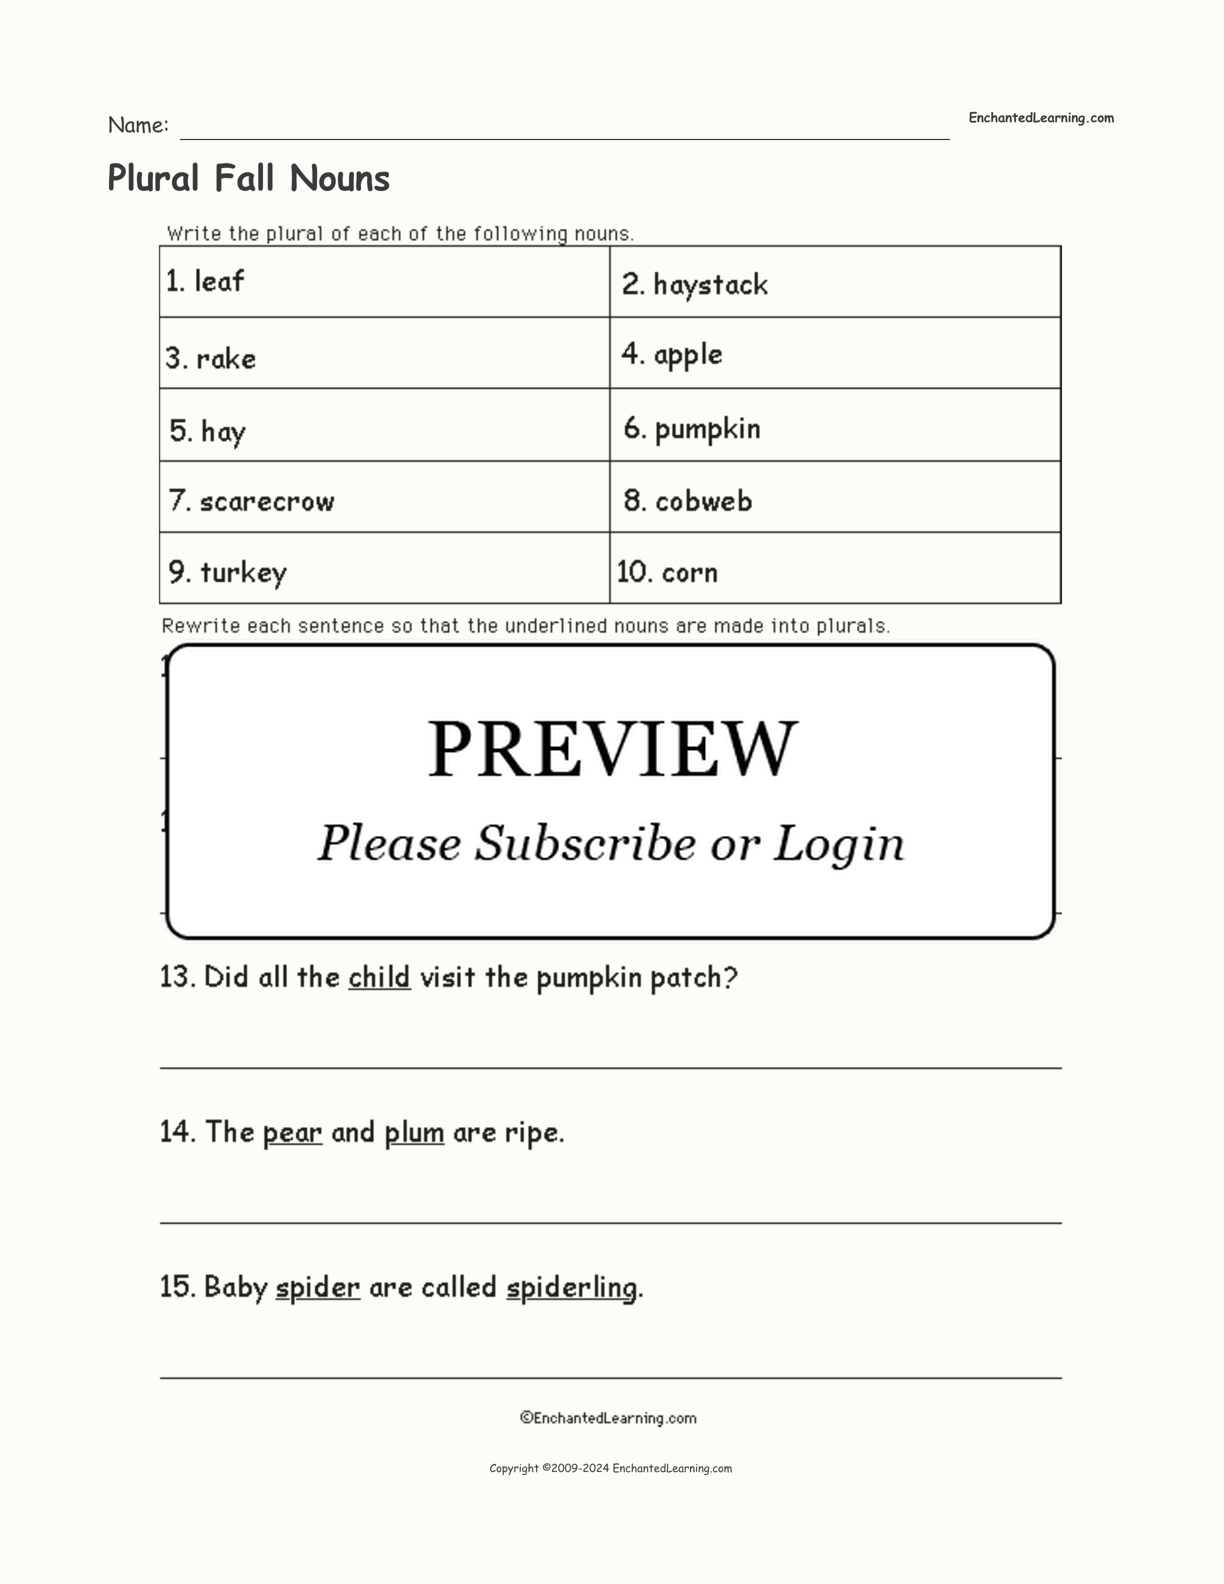 Plural Fall Nouns interactive worksheet page 1